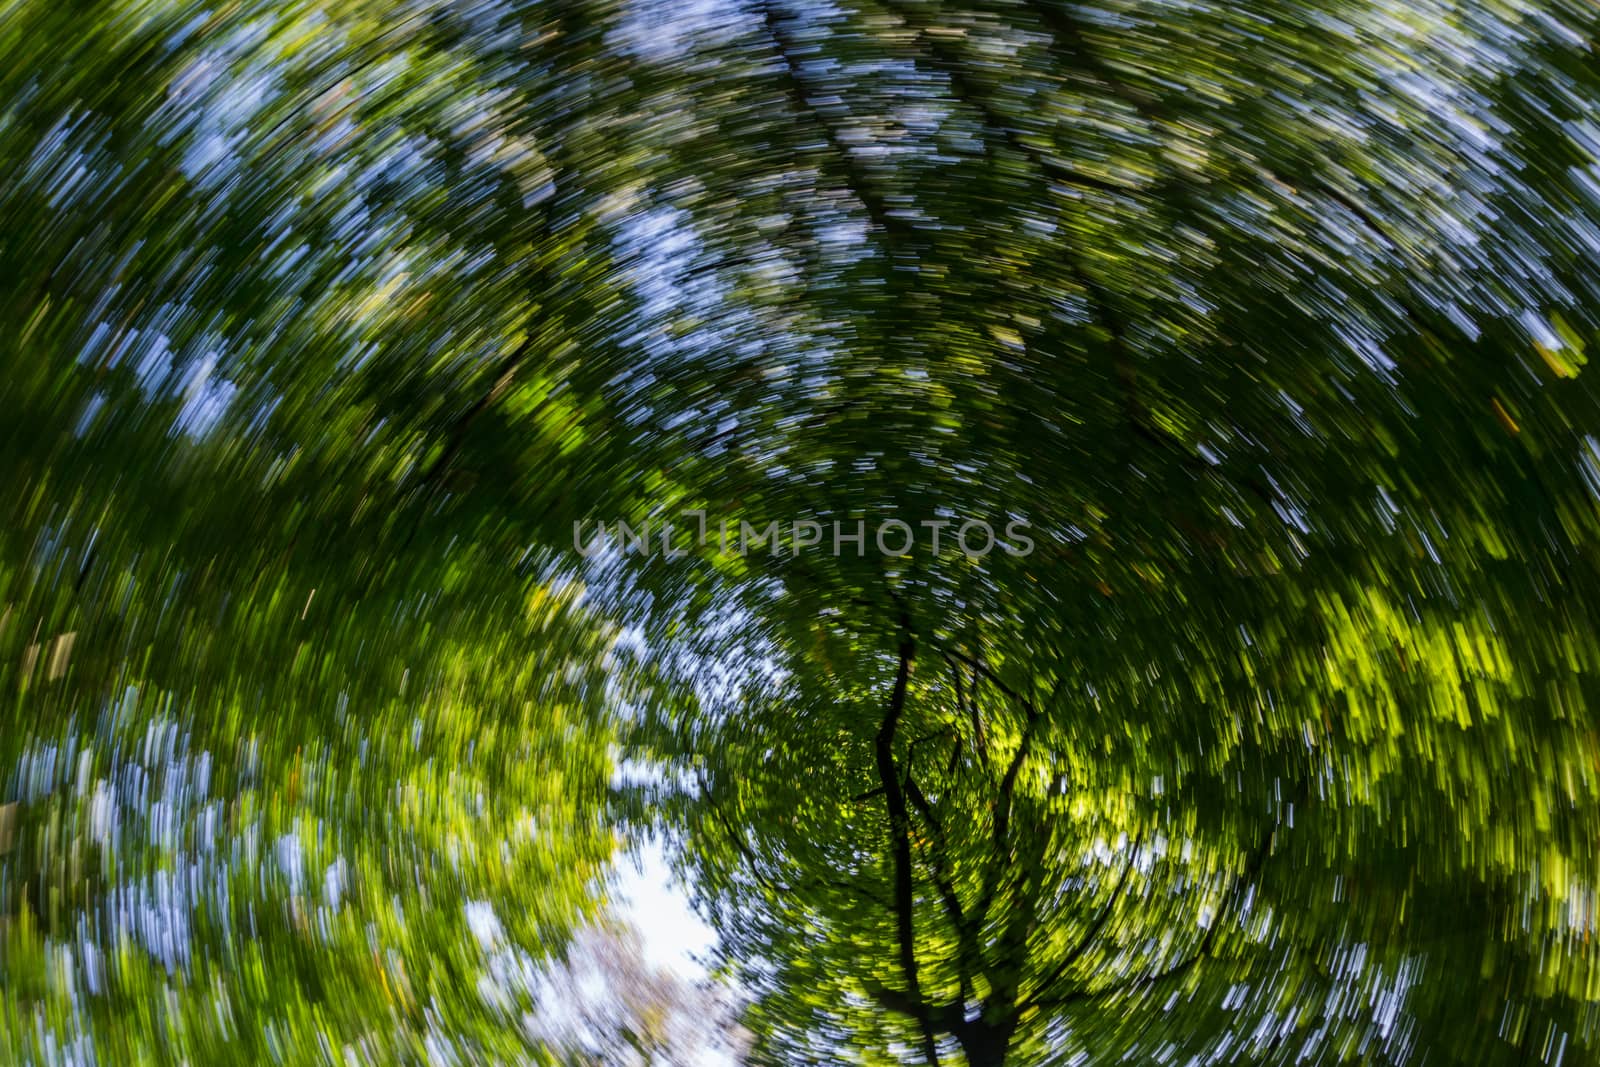 Rotation spin effect looking up through pine trees